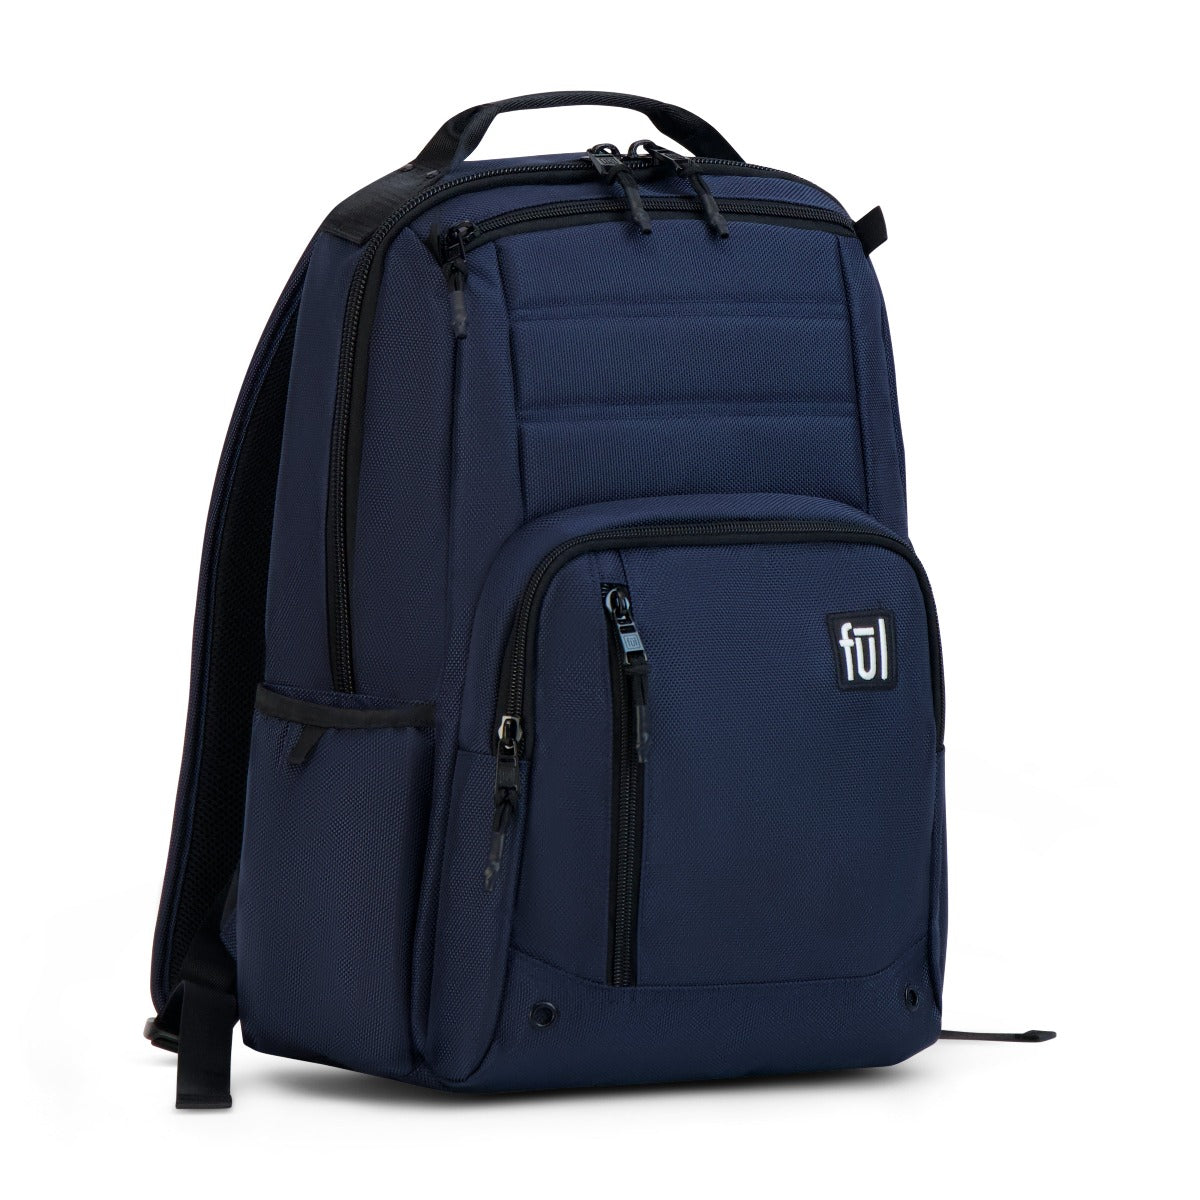 ful tactics collection phantom backpack navy blue - multi-functional tech safe backpacks